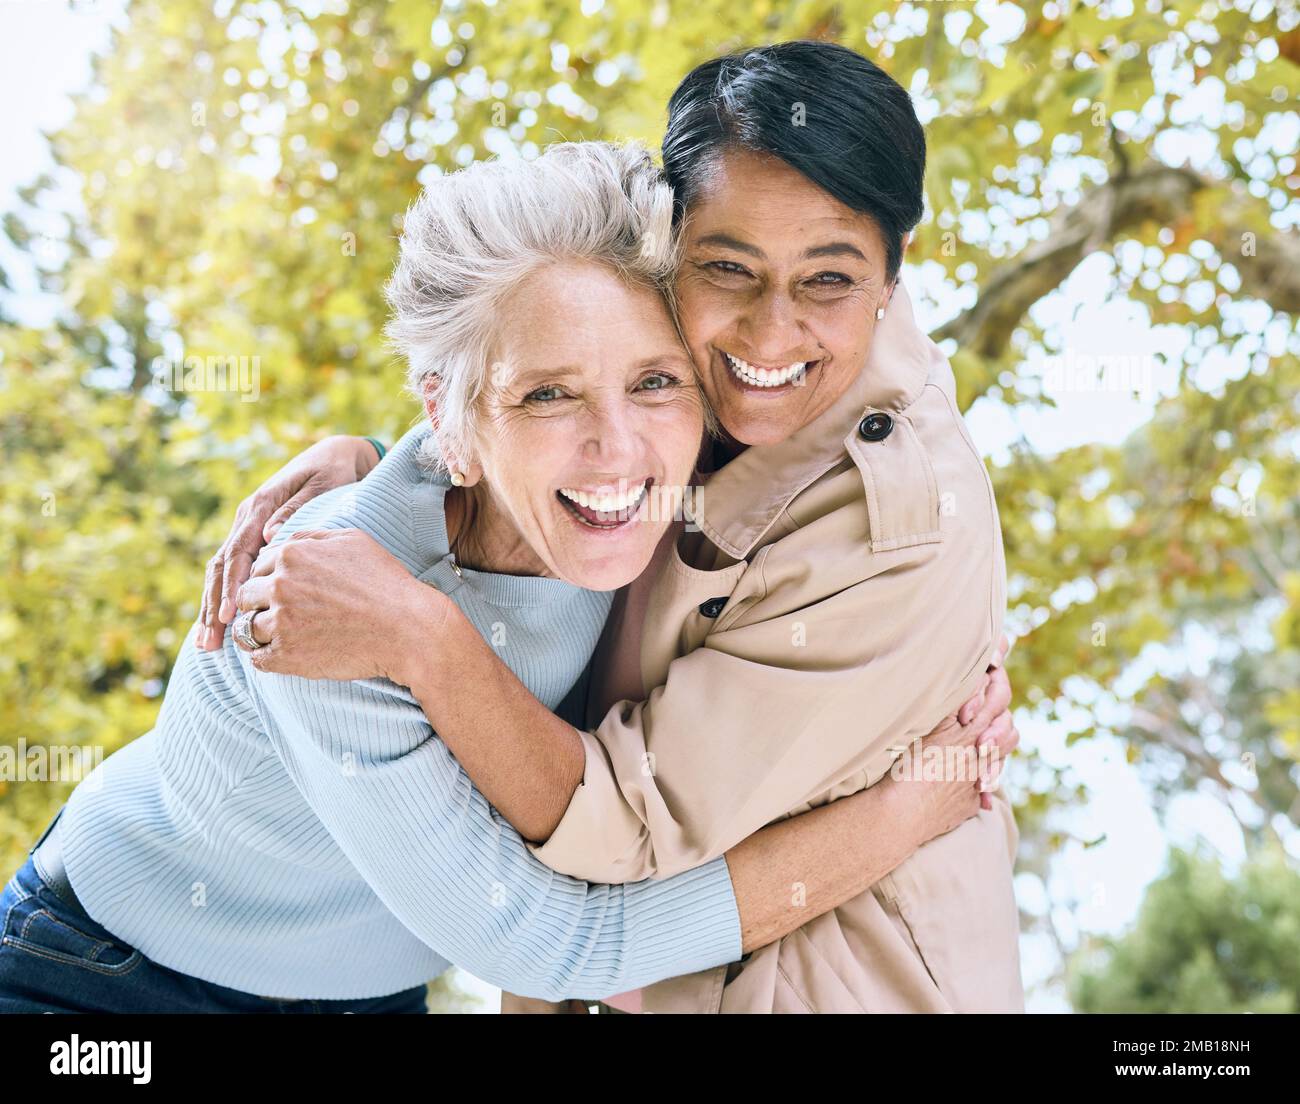 Senior women, portrait and laughing hug in nature park, garden or relax environment in retirement, support or trust. Smile, happy friends and bonding Stock Photo